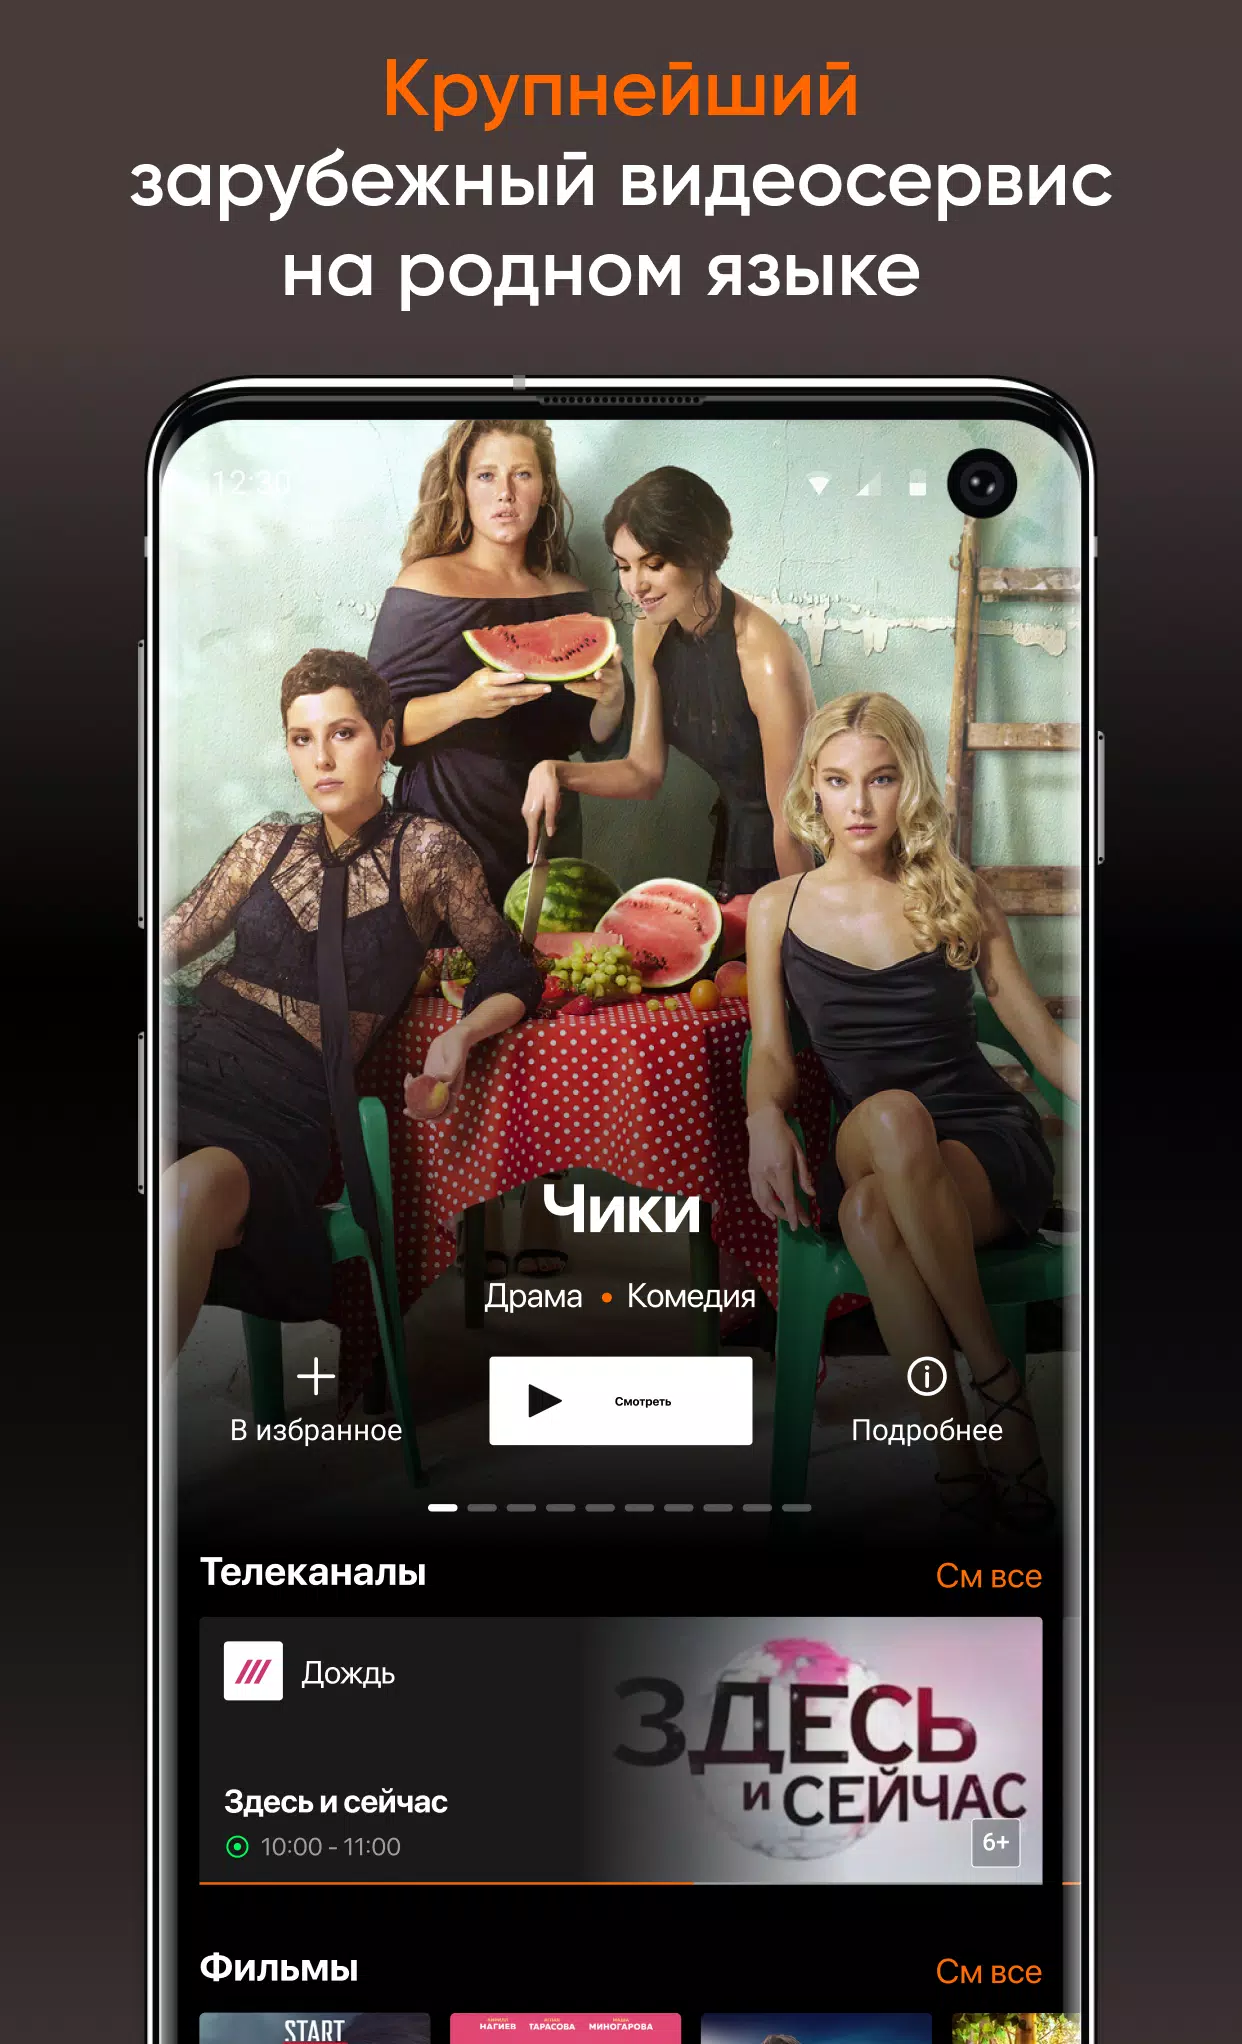 Kartina.TV for Android - APK Download